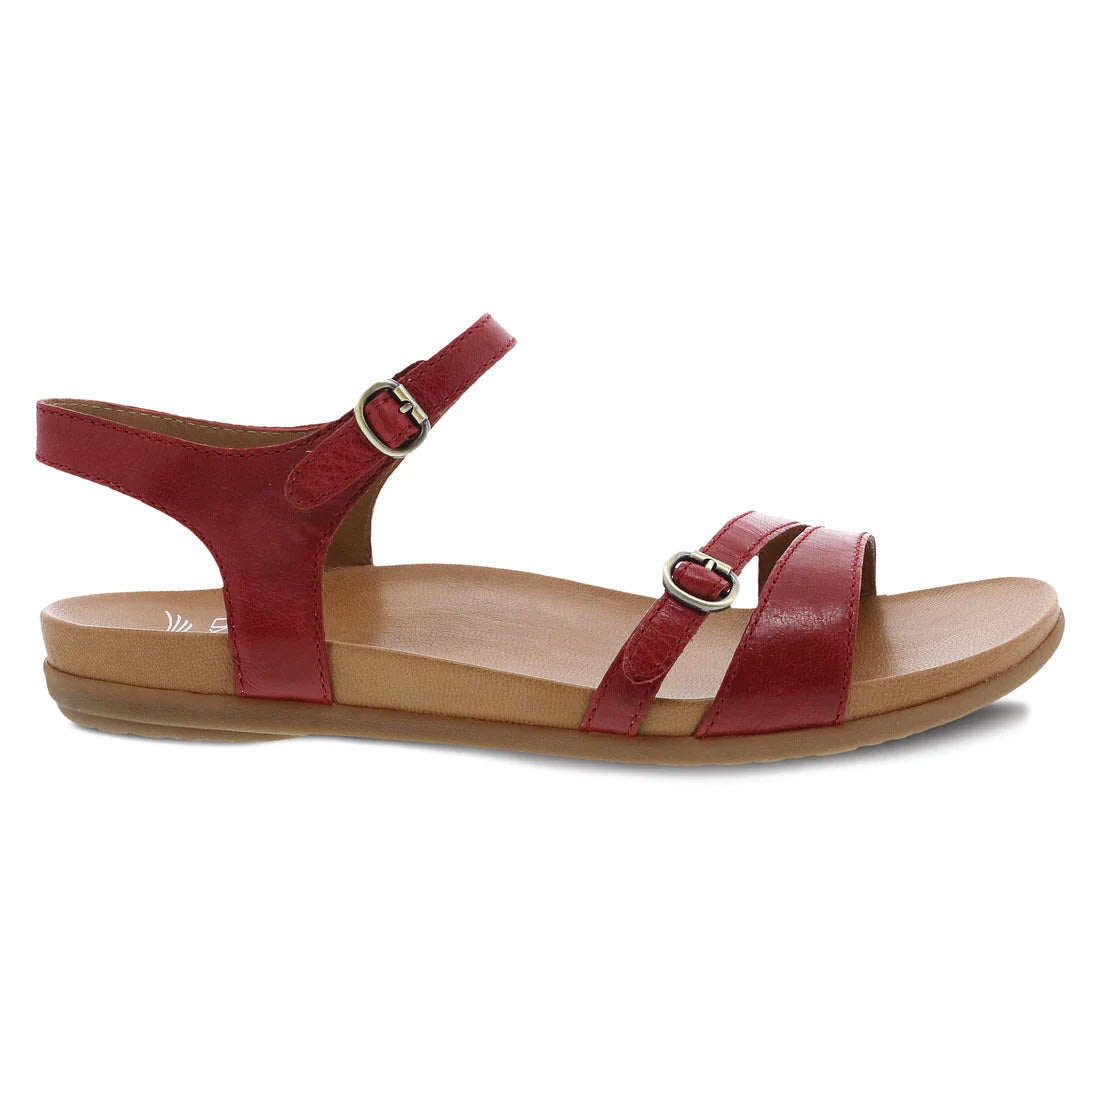 A single Dansko Janelle Red Glazed sandal with two straps, each fastened by adjustable closures, displayed against a white background.